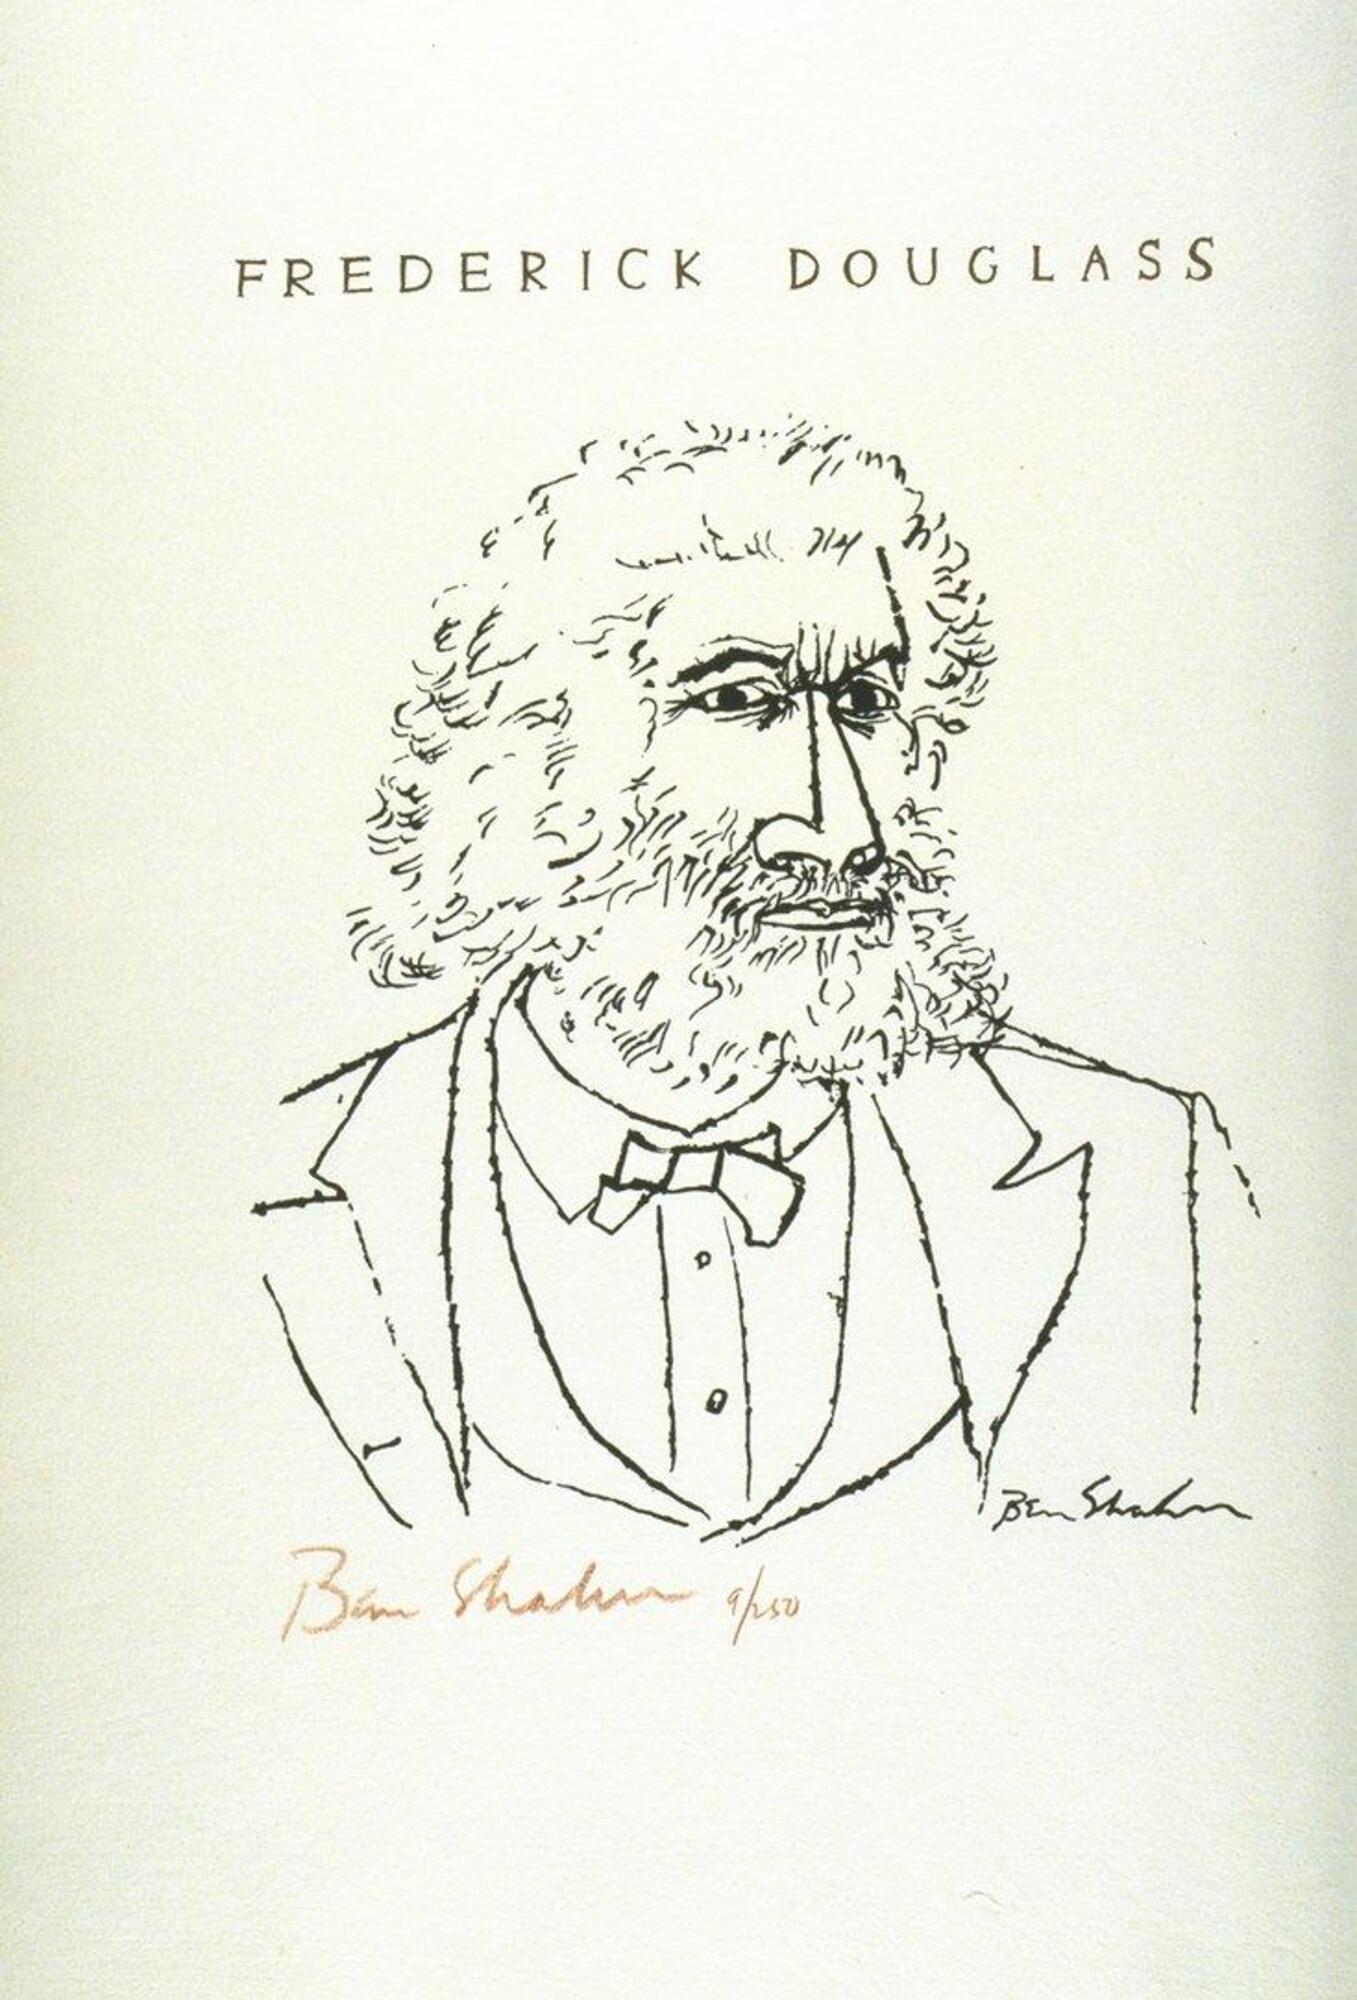 A man is potrayed with curly hair and beard, a stern facial expression, and a formal suit and bowtie. His head and gaze is turned to the right of the piece. The words &quot;Frederick Douglass&quot; borders the piece along with the artist&#39;s signatures and the screenprint number.